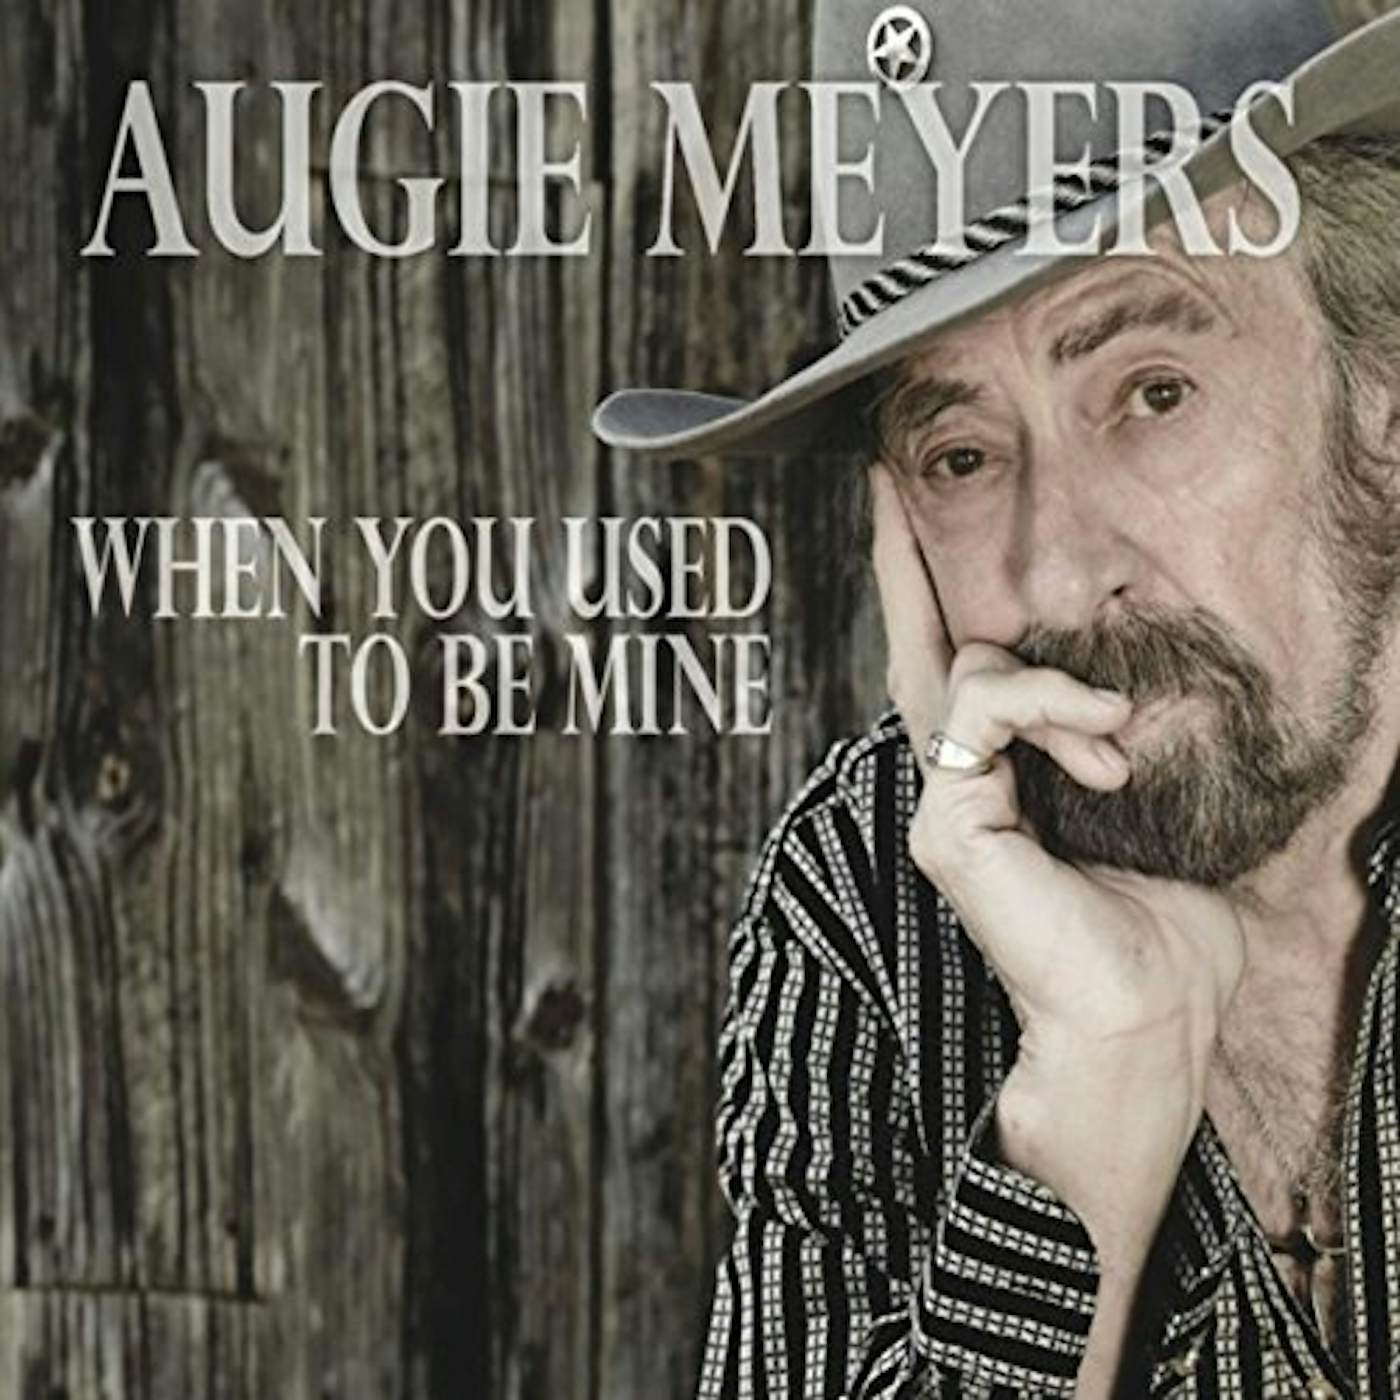 Augie Meyers WHEN YOU USED TO BE MINE CD